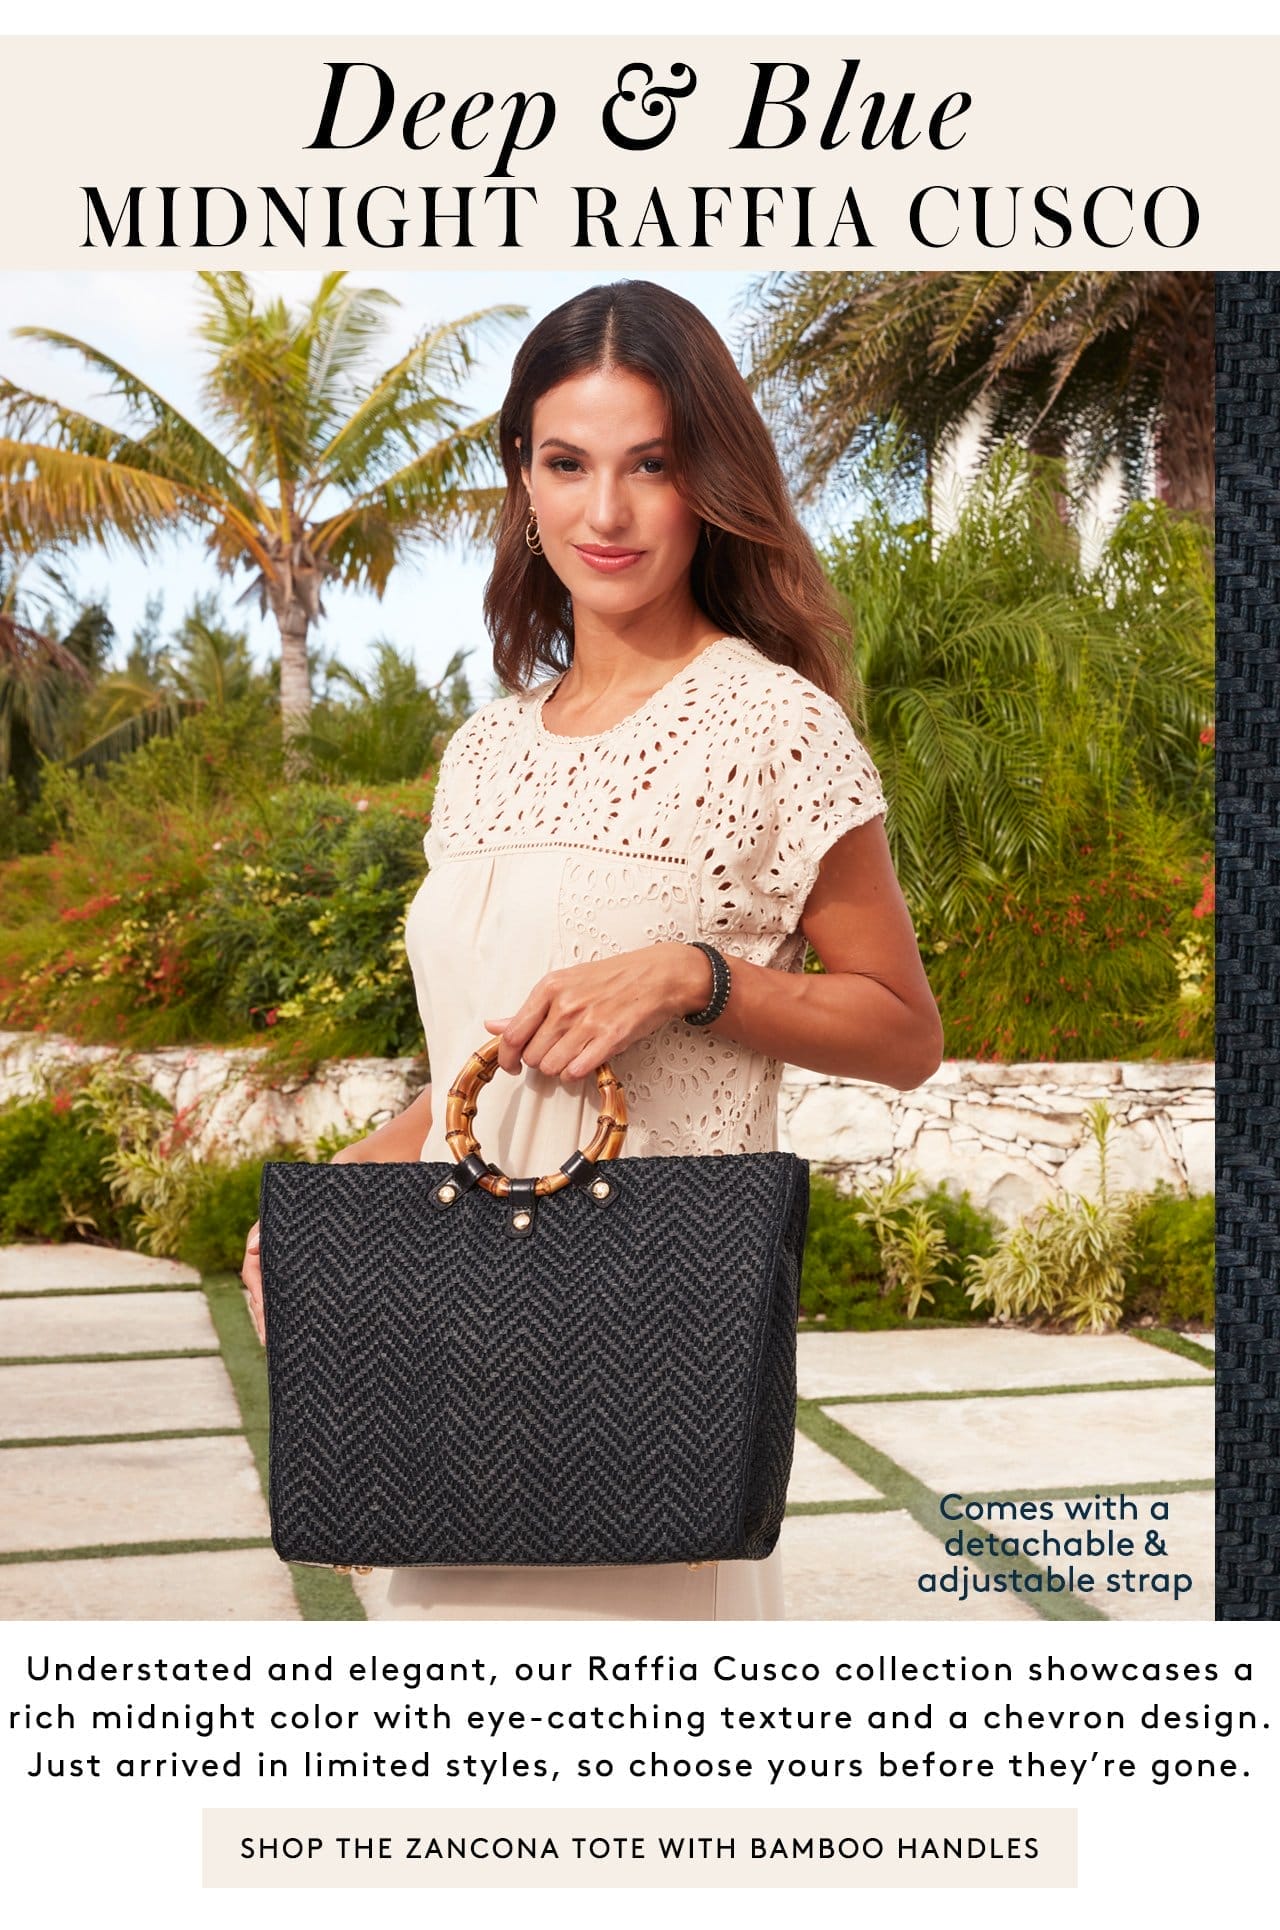 Deep & Blue, Midnight Raffia Cusco, Understated and elegant, our Raffia Cusco collection showcases a rich midnight color with eye-catching texture and a chevron design. Just arrived in limited styles, so choose yours before they’re gone. Comes with a detachable & adjustable strap. Shop the Zancona Tote with Bamboo Handles